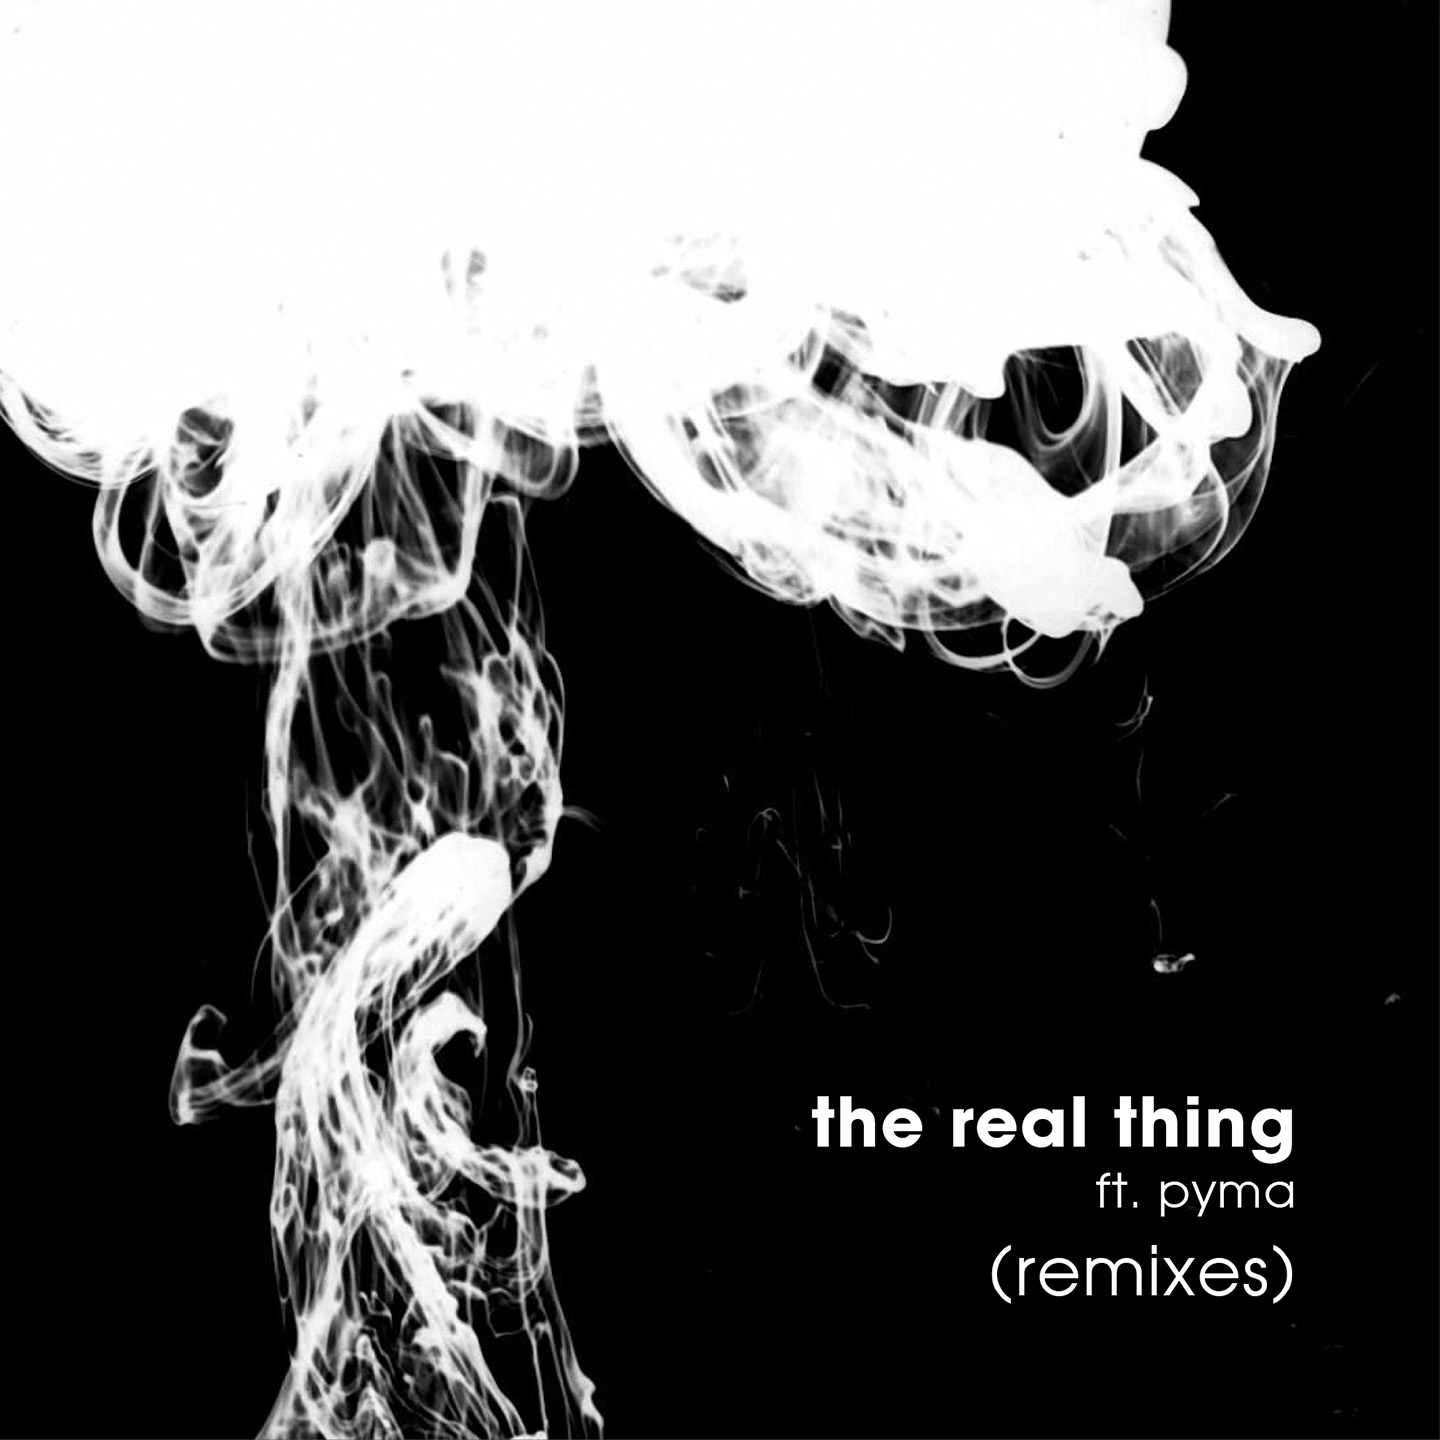 The Real Thing (Remixes)